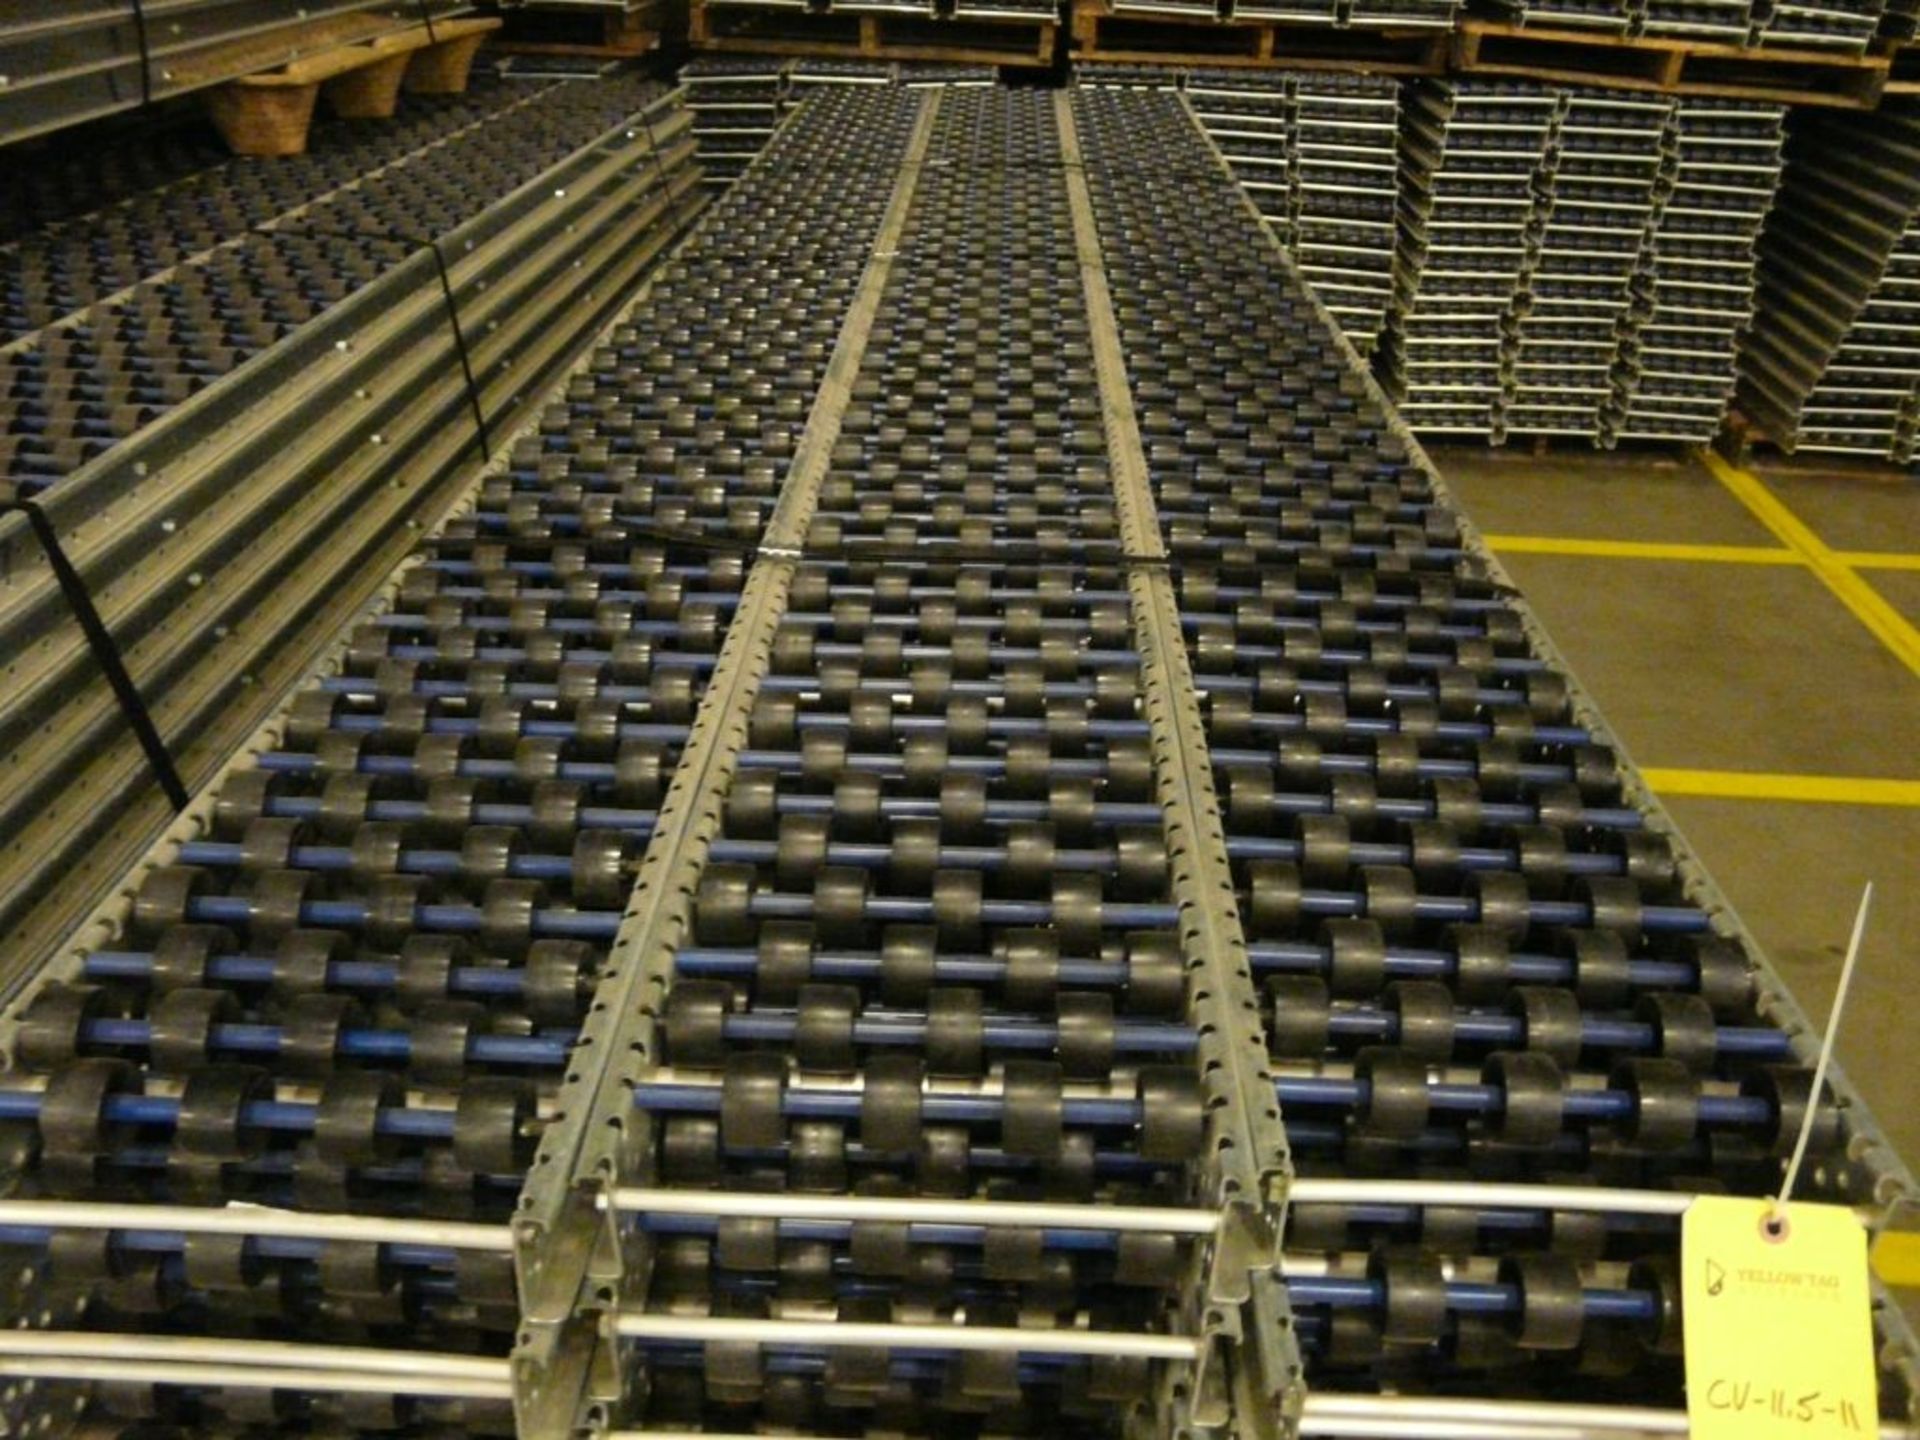 Lot of (90) SpanTrack Wheelbed Carton Flow Conveyors - 11.5'L x 11"W; Tag: 223650 - $30 Lot - Image 3 of 4